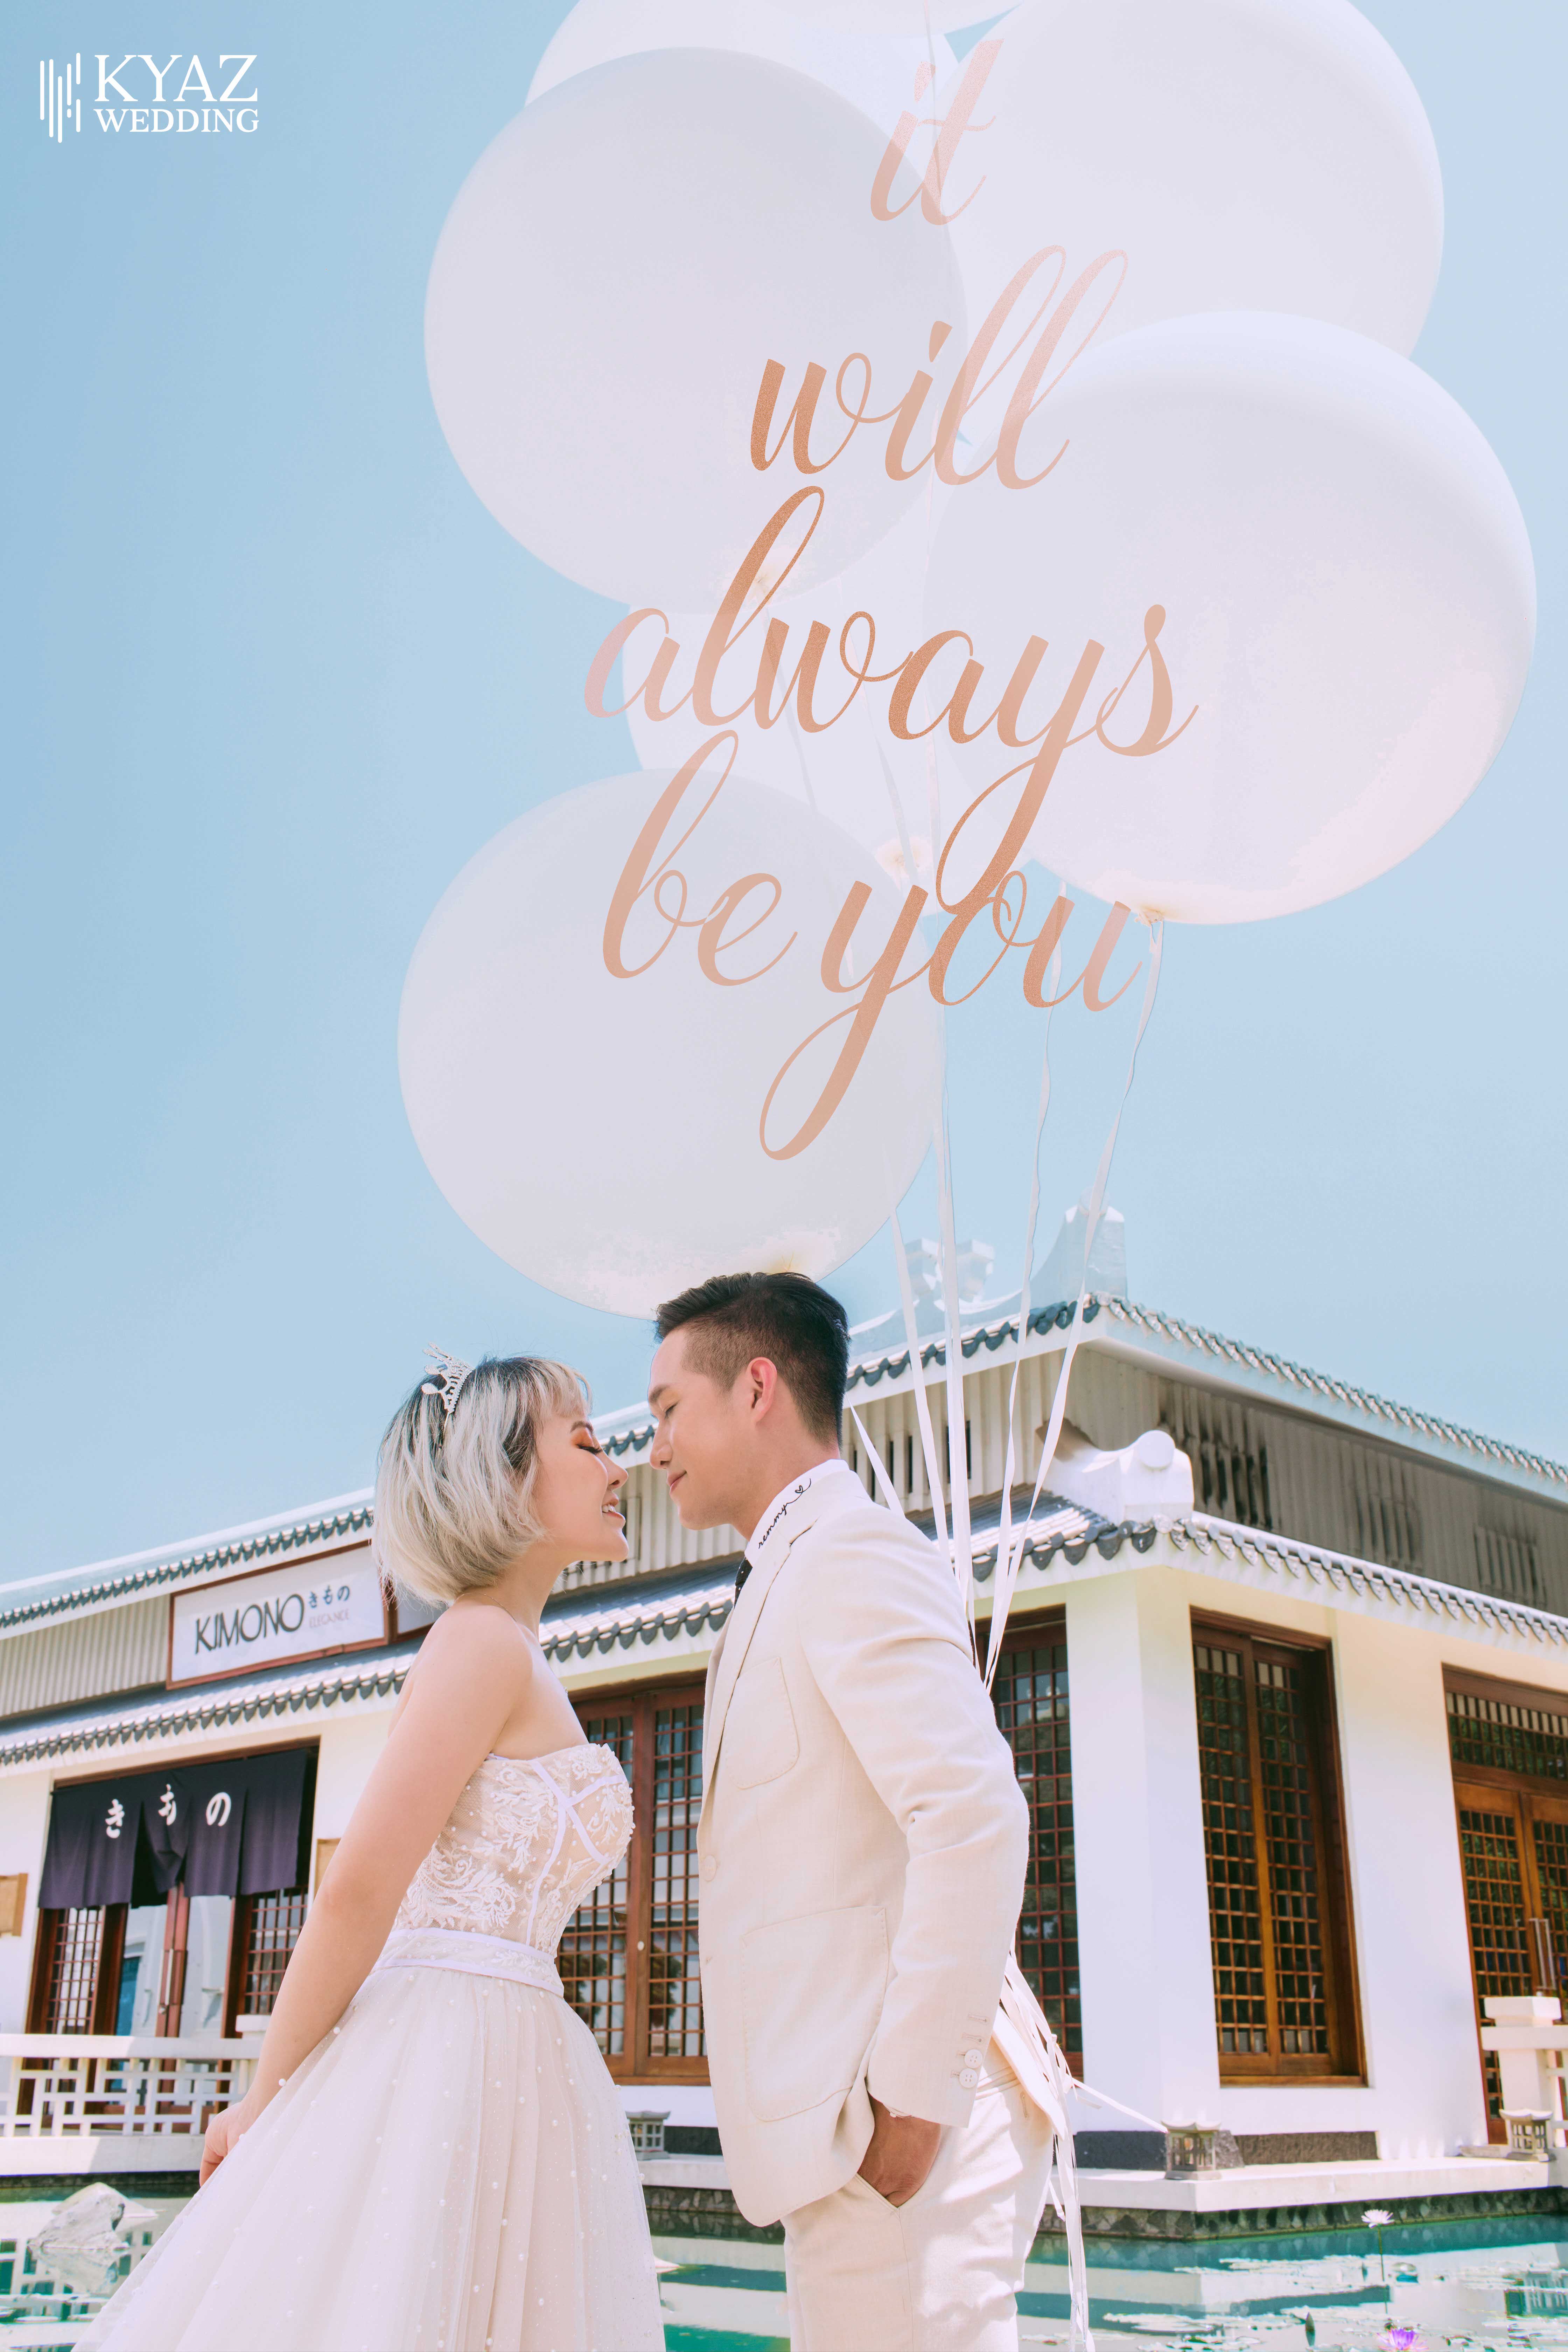 IT WILL ALWAY BE YOU - Nam & Ngoc